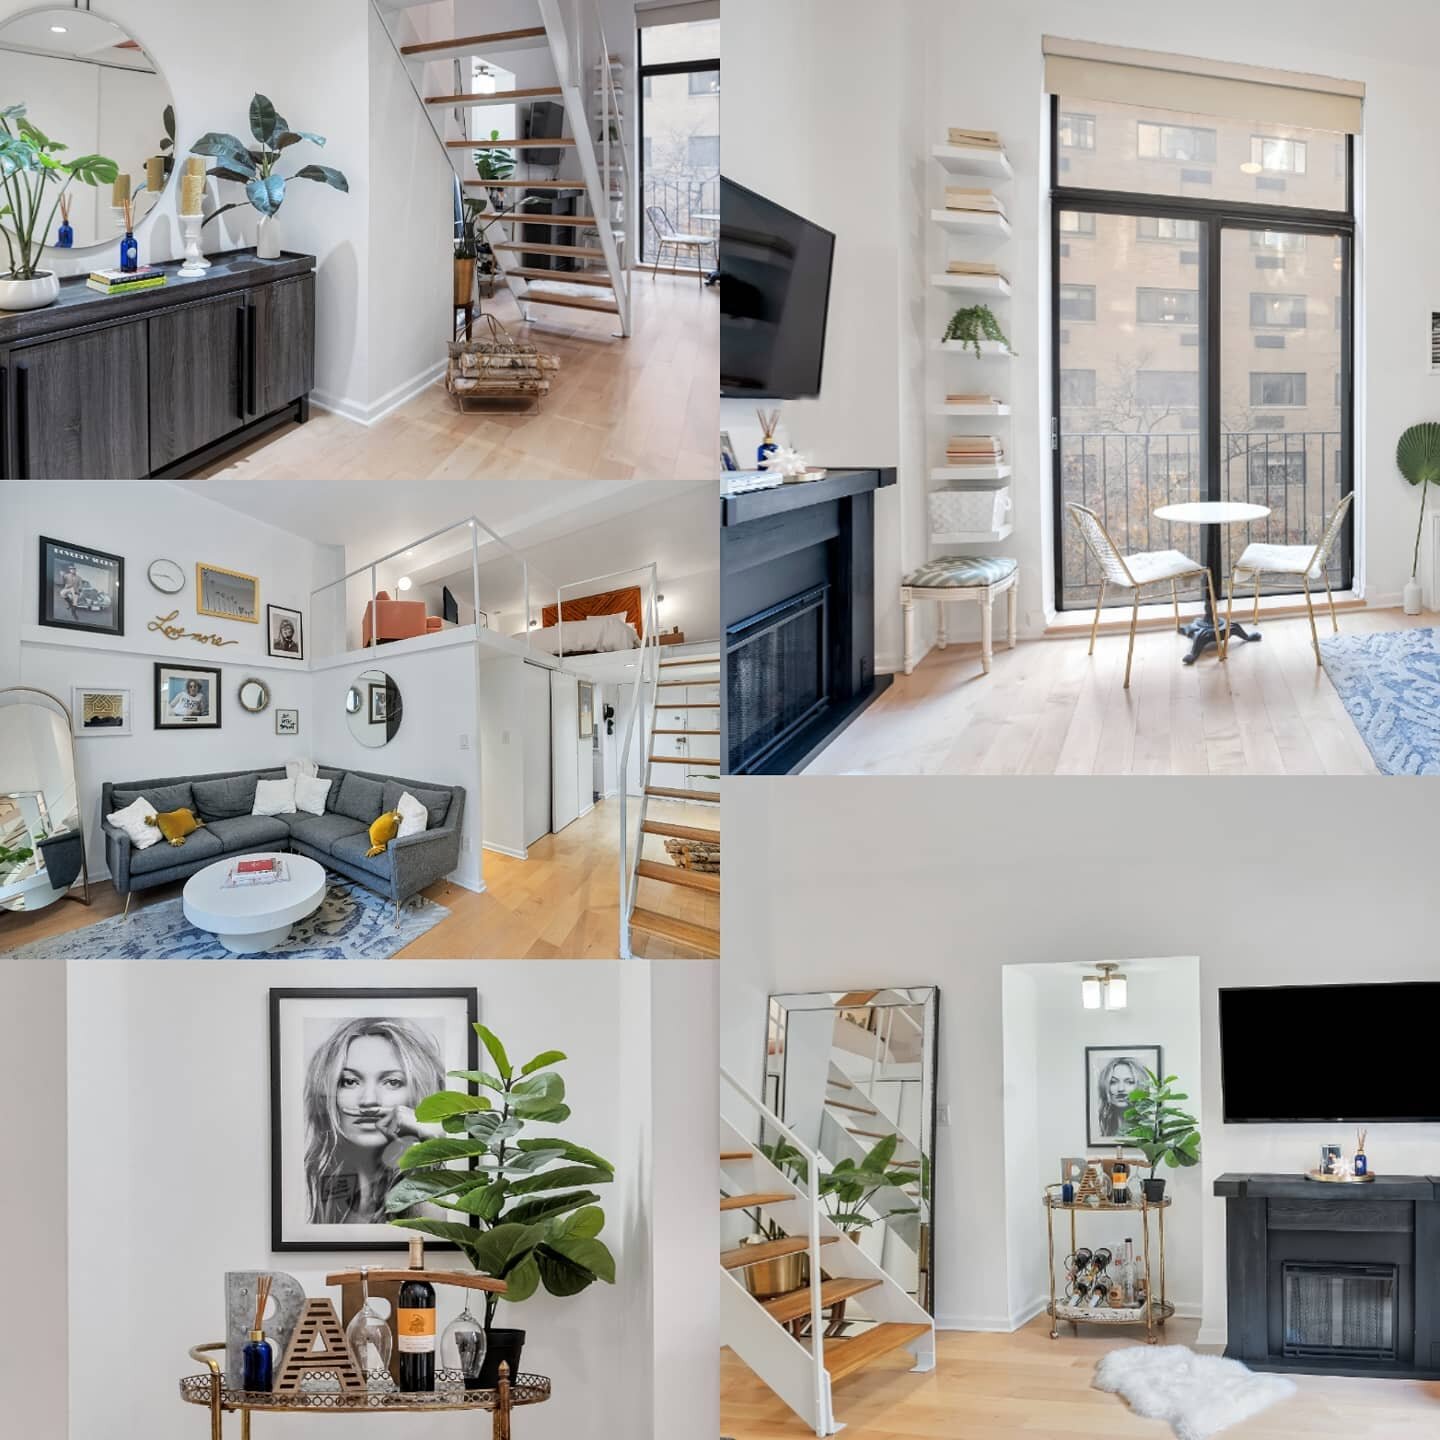 New Listing at Penny Lane!  #moderndesign and #sophisticatedstyle brings this #luxuryrealestate mint condition 1bd #duplex in #gramercy #levelgroup #moveup #interiordecorating #designer #southfacing #whitecalcatta #milliondollarlisting #pennylane #ny